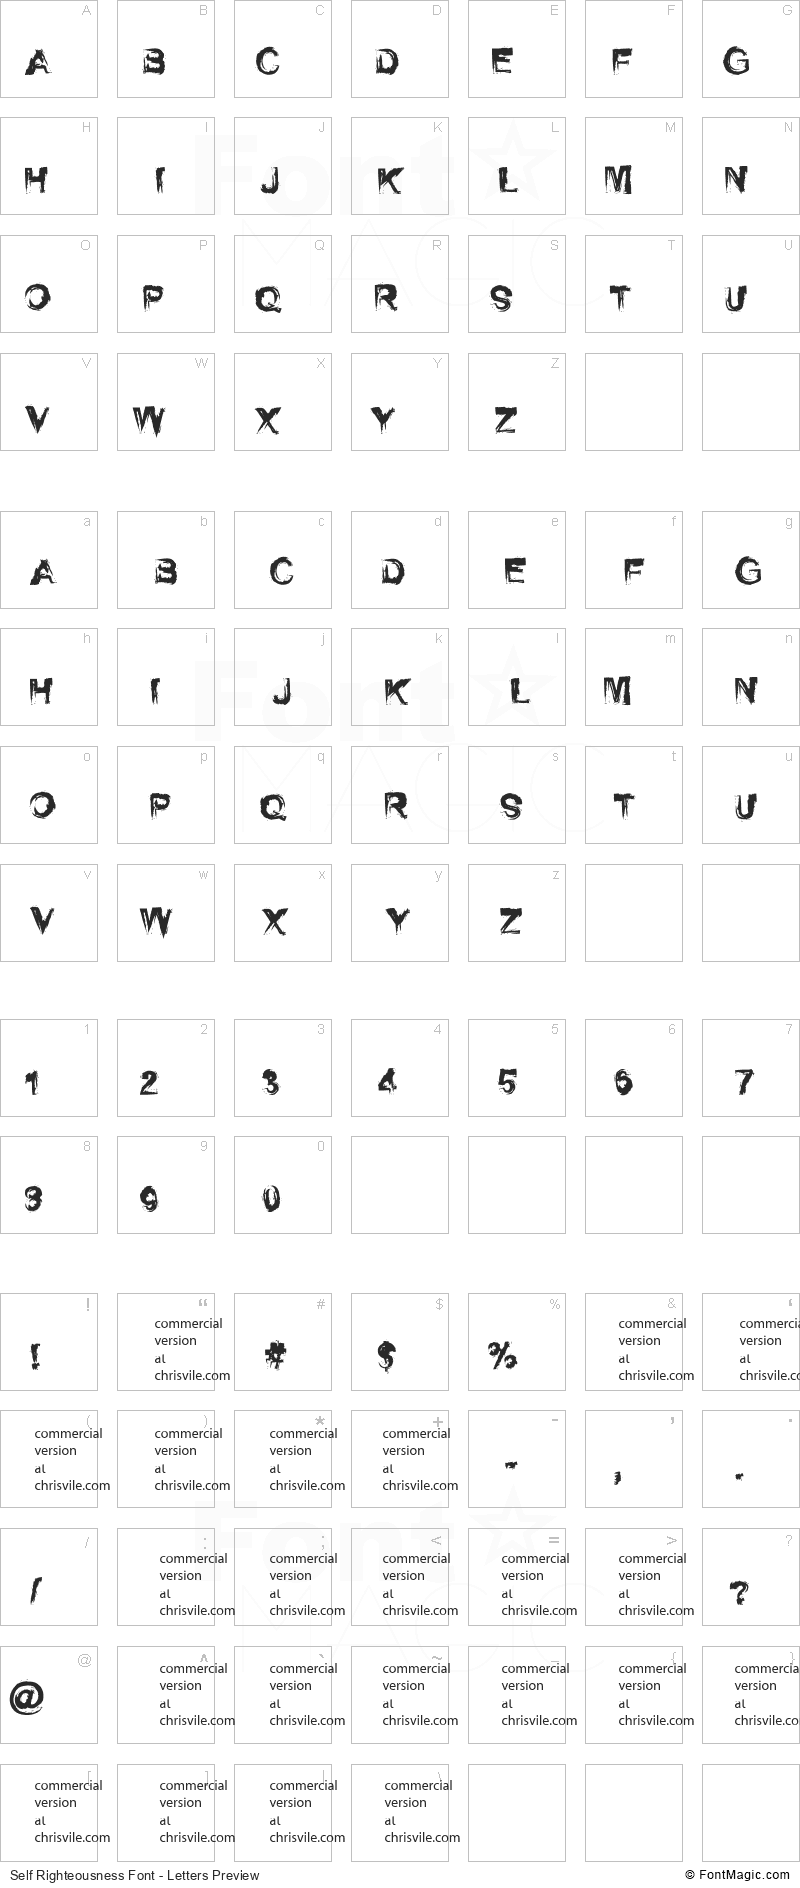 Self Righteousness Font - All Latters Preview Chart